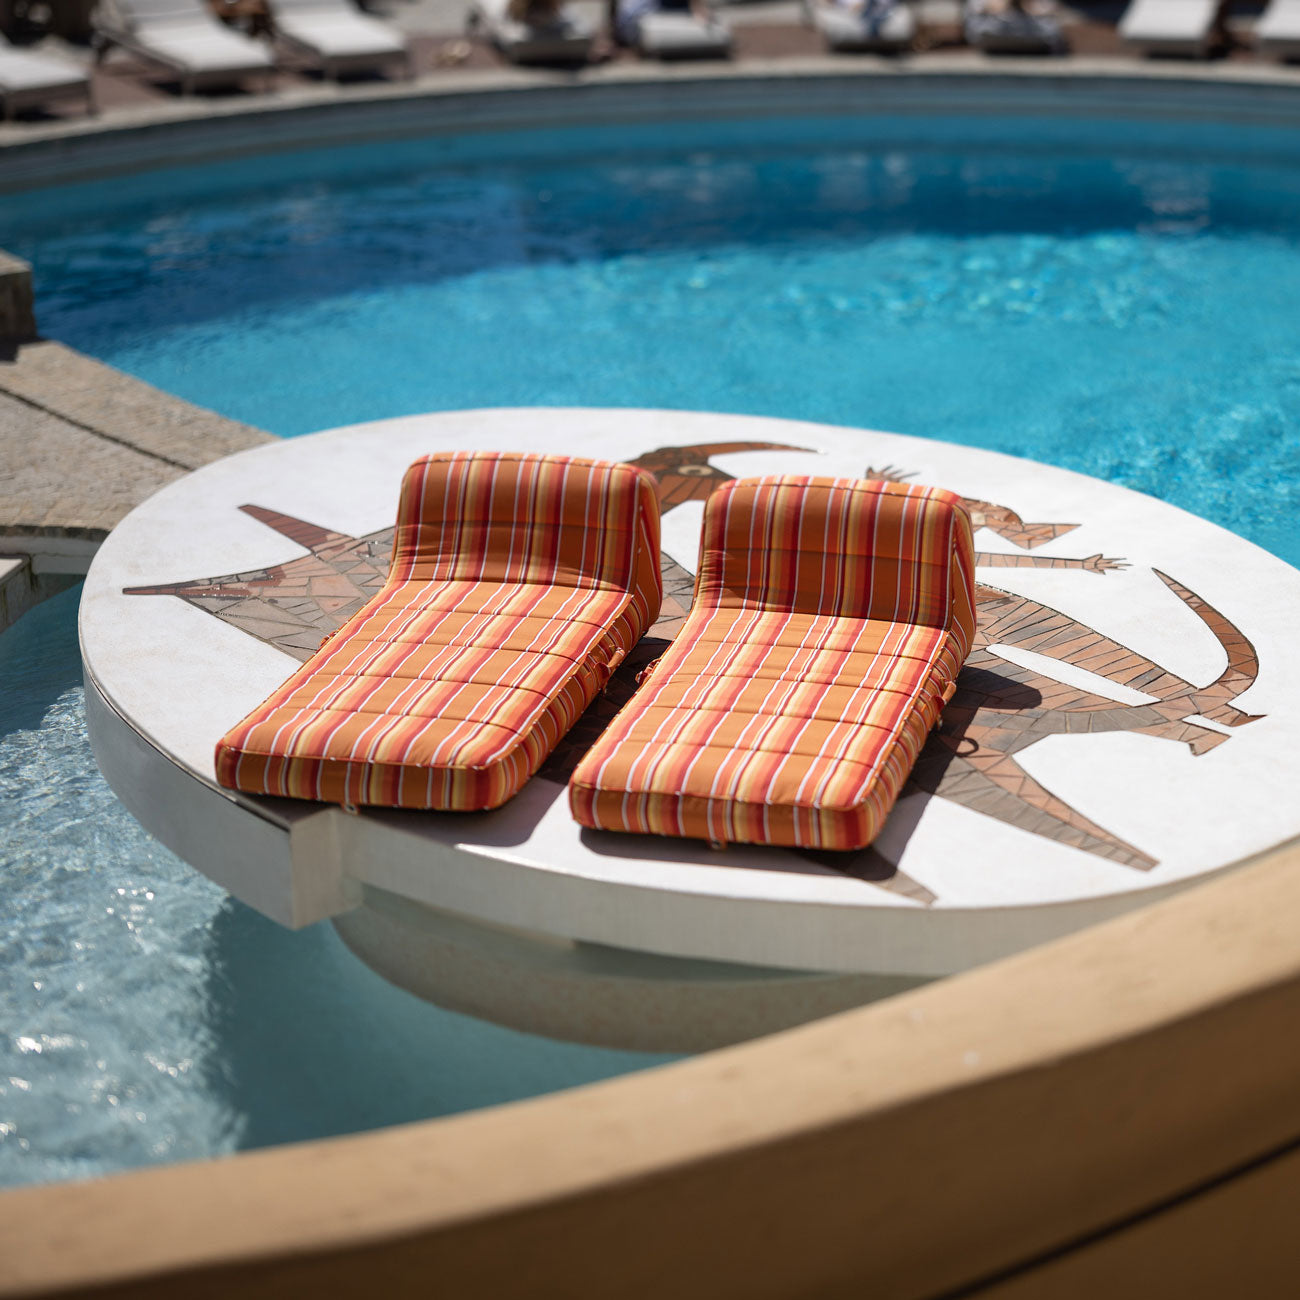 Two orange and white striped pool float loungers for adults sitting on a podium next to a swimming pool.